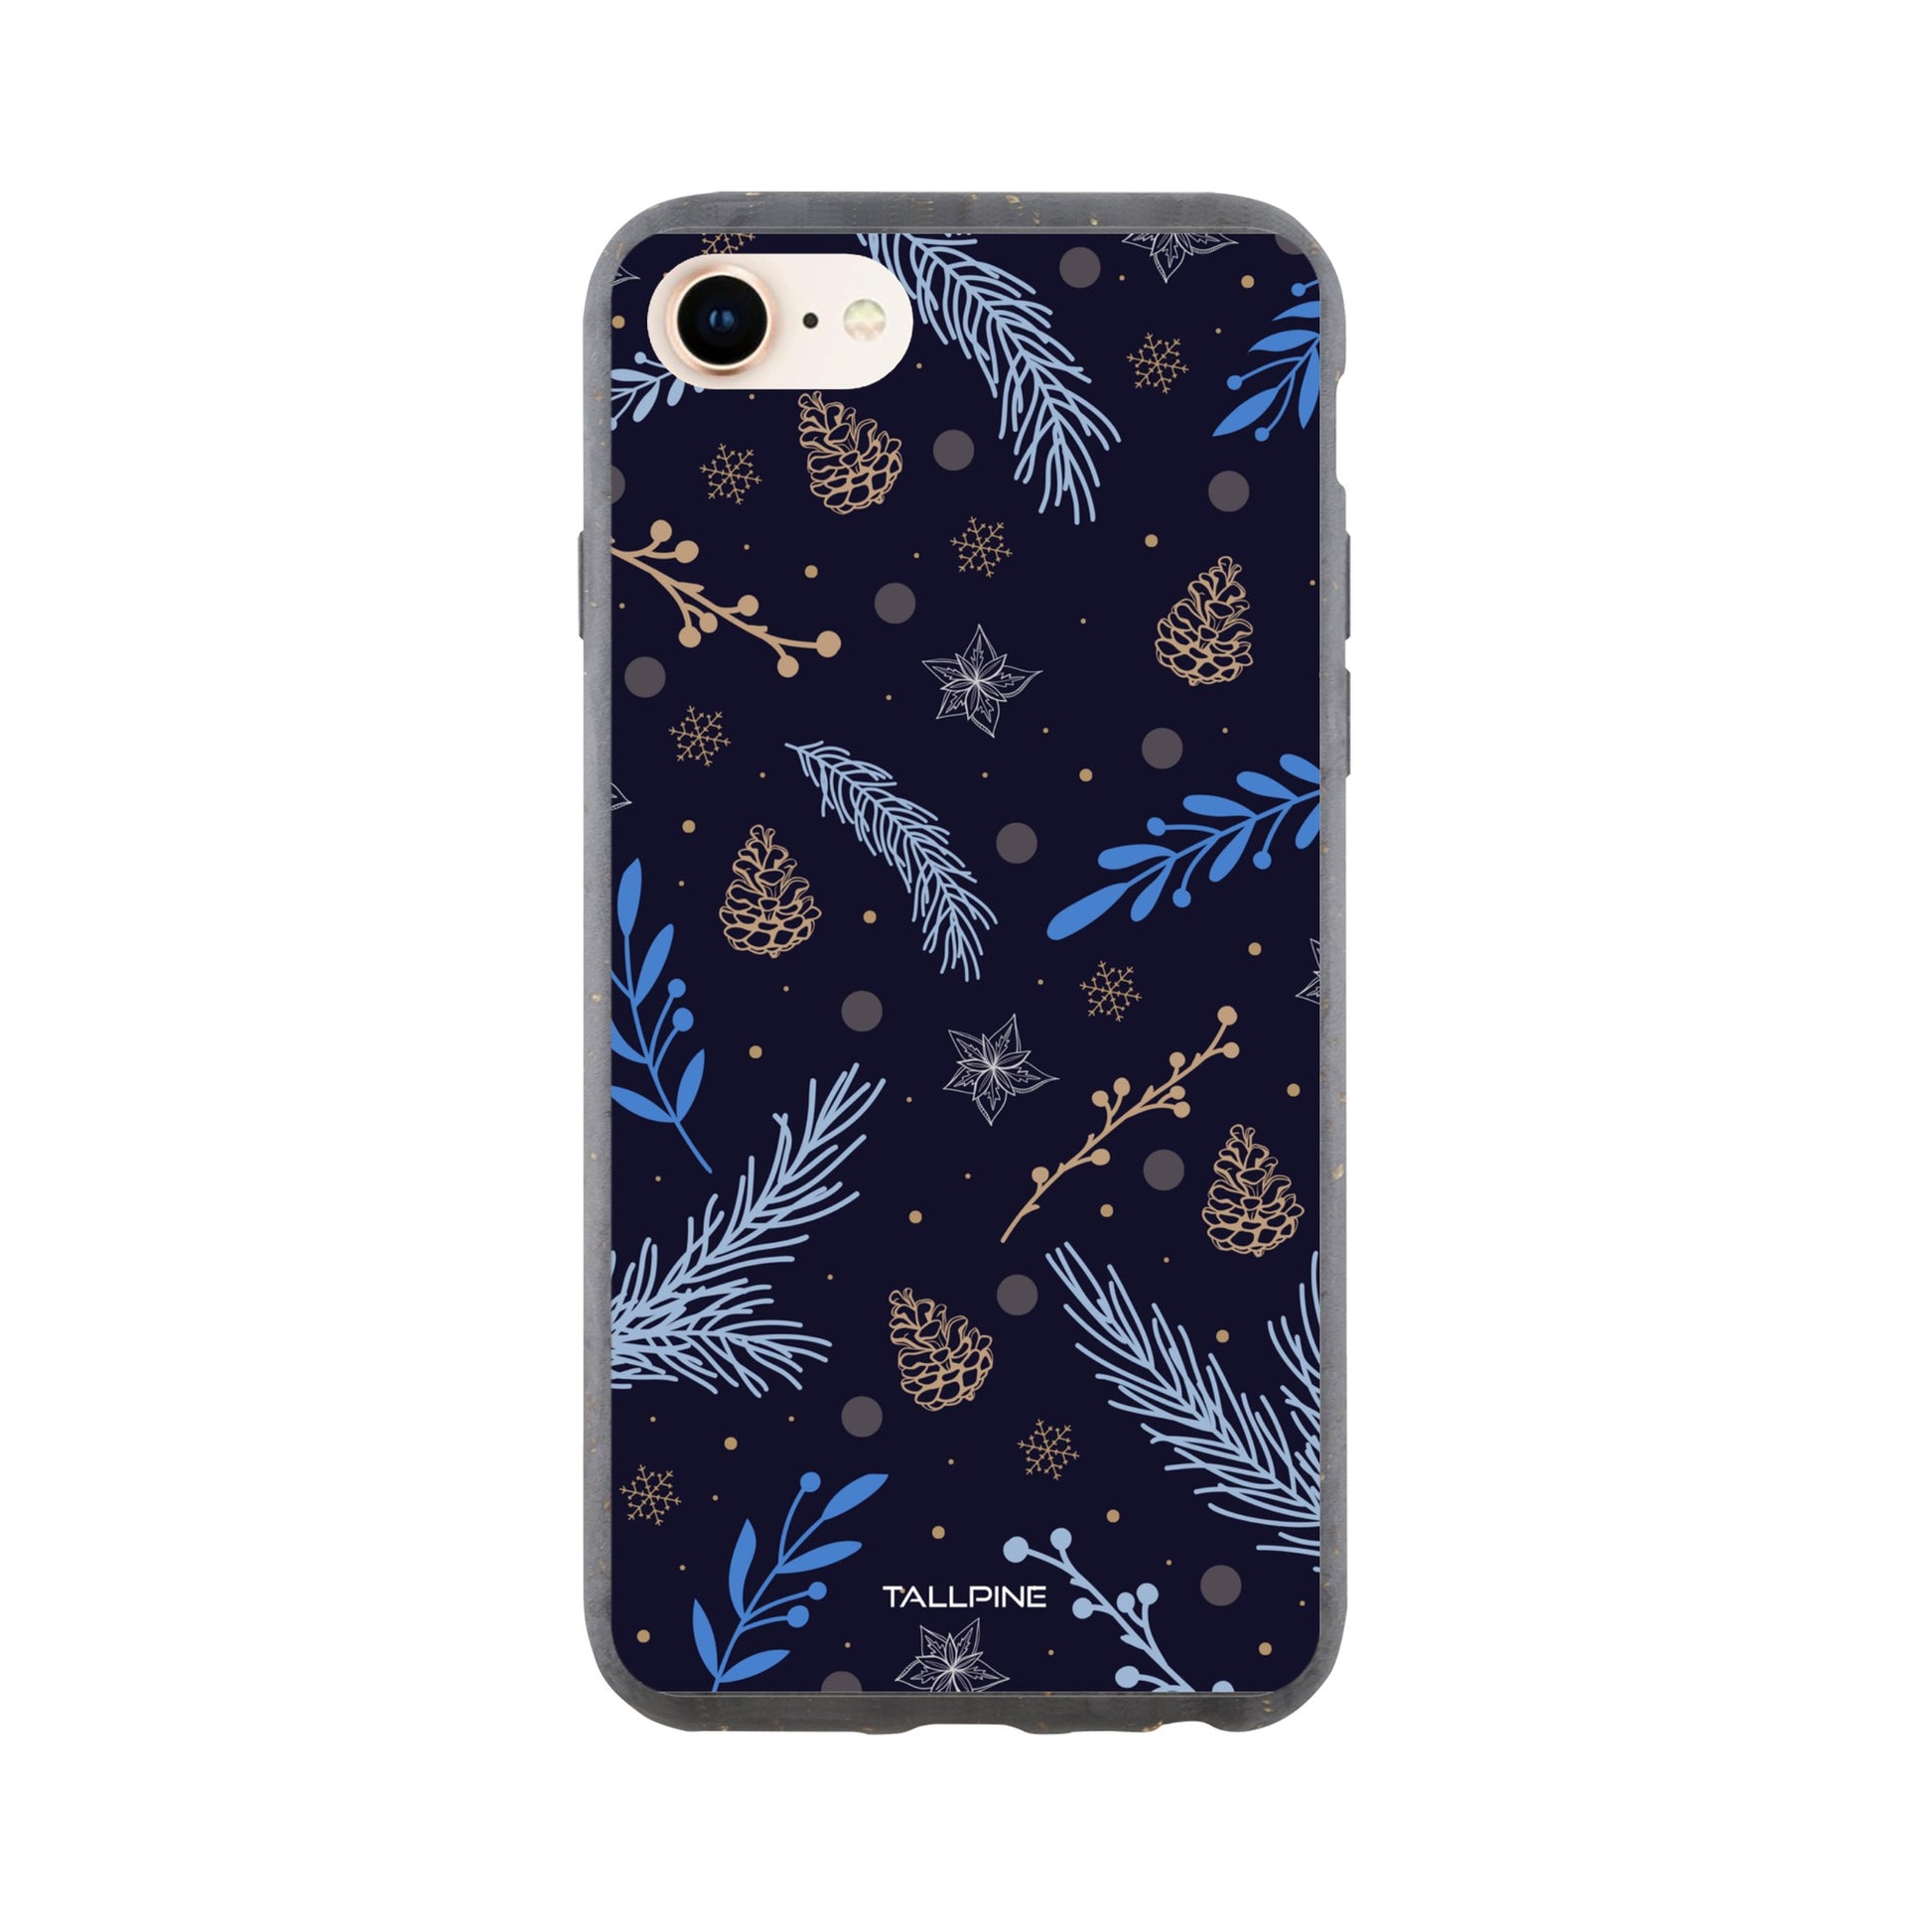 Arctic Dreams - Eco Case iPhone 8 - Tallpine Cases | Sustainable and Eco-Friendly - Nature